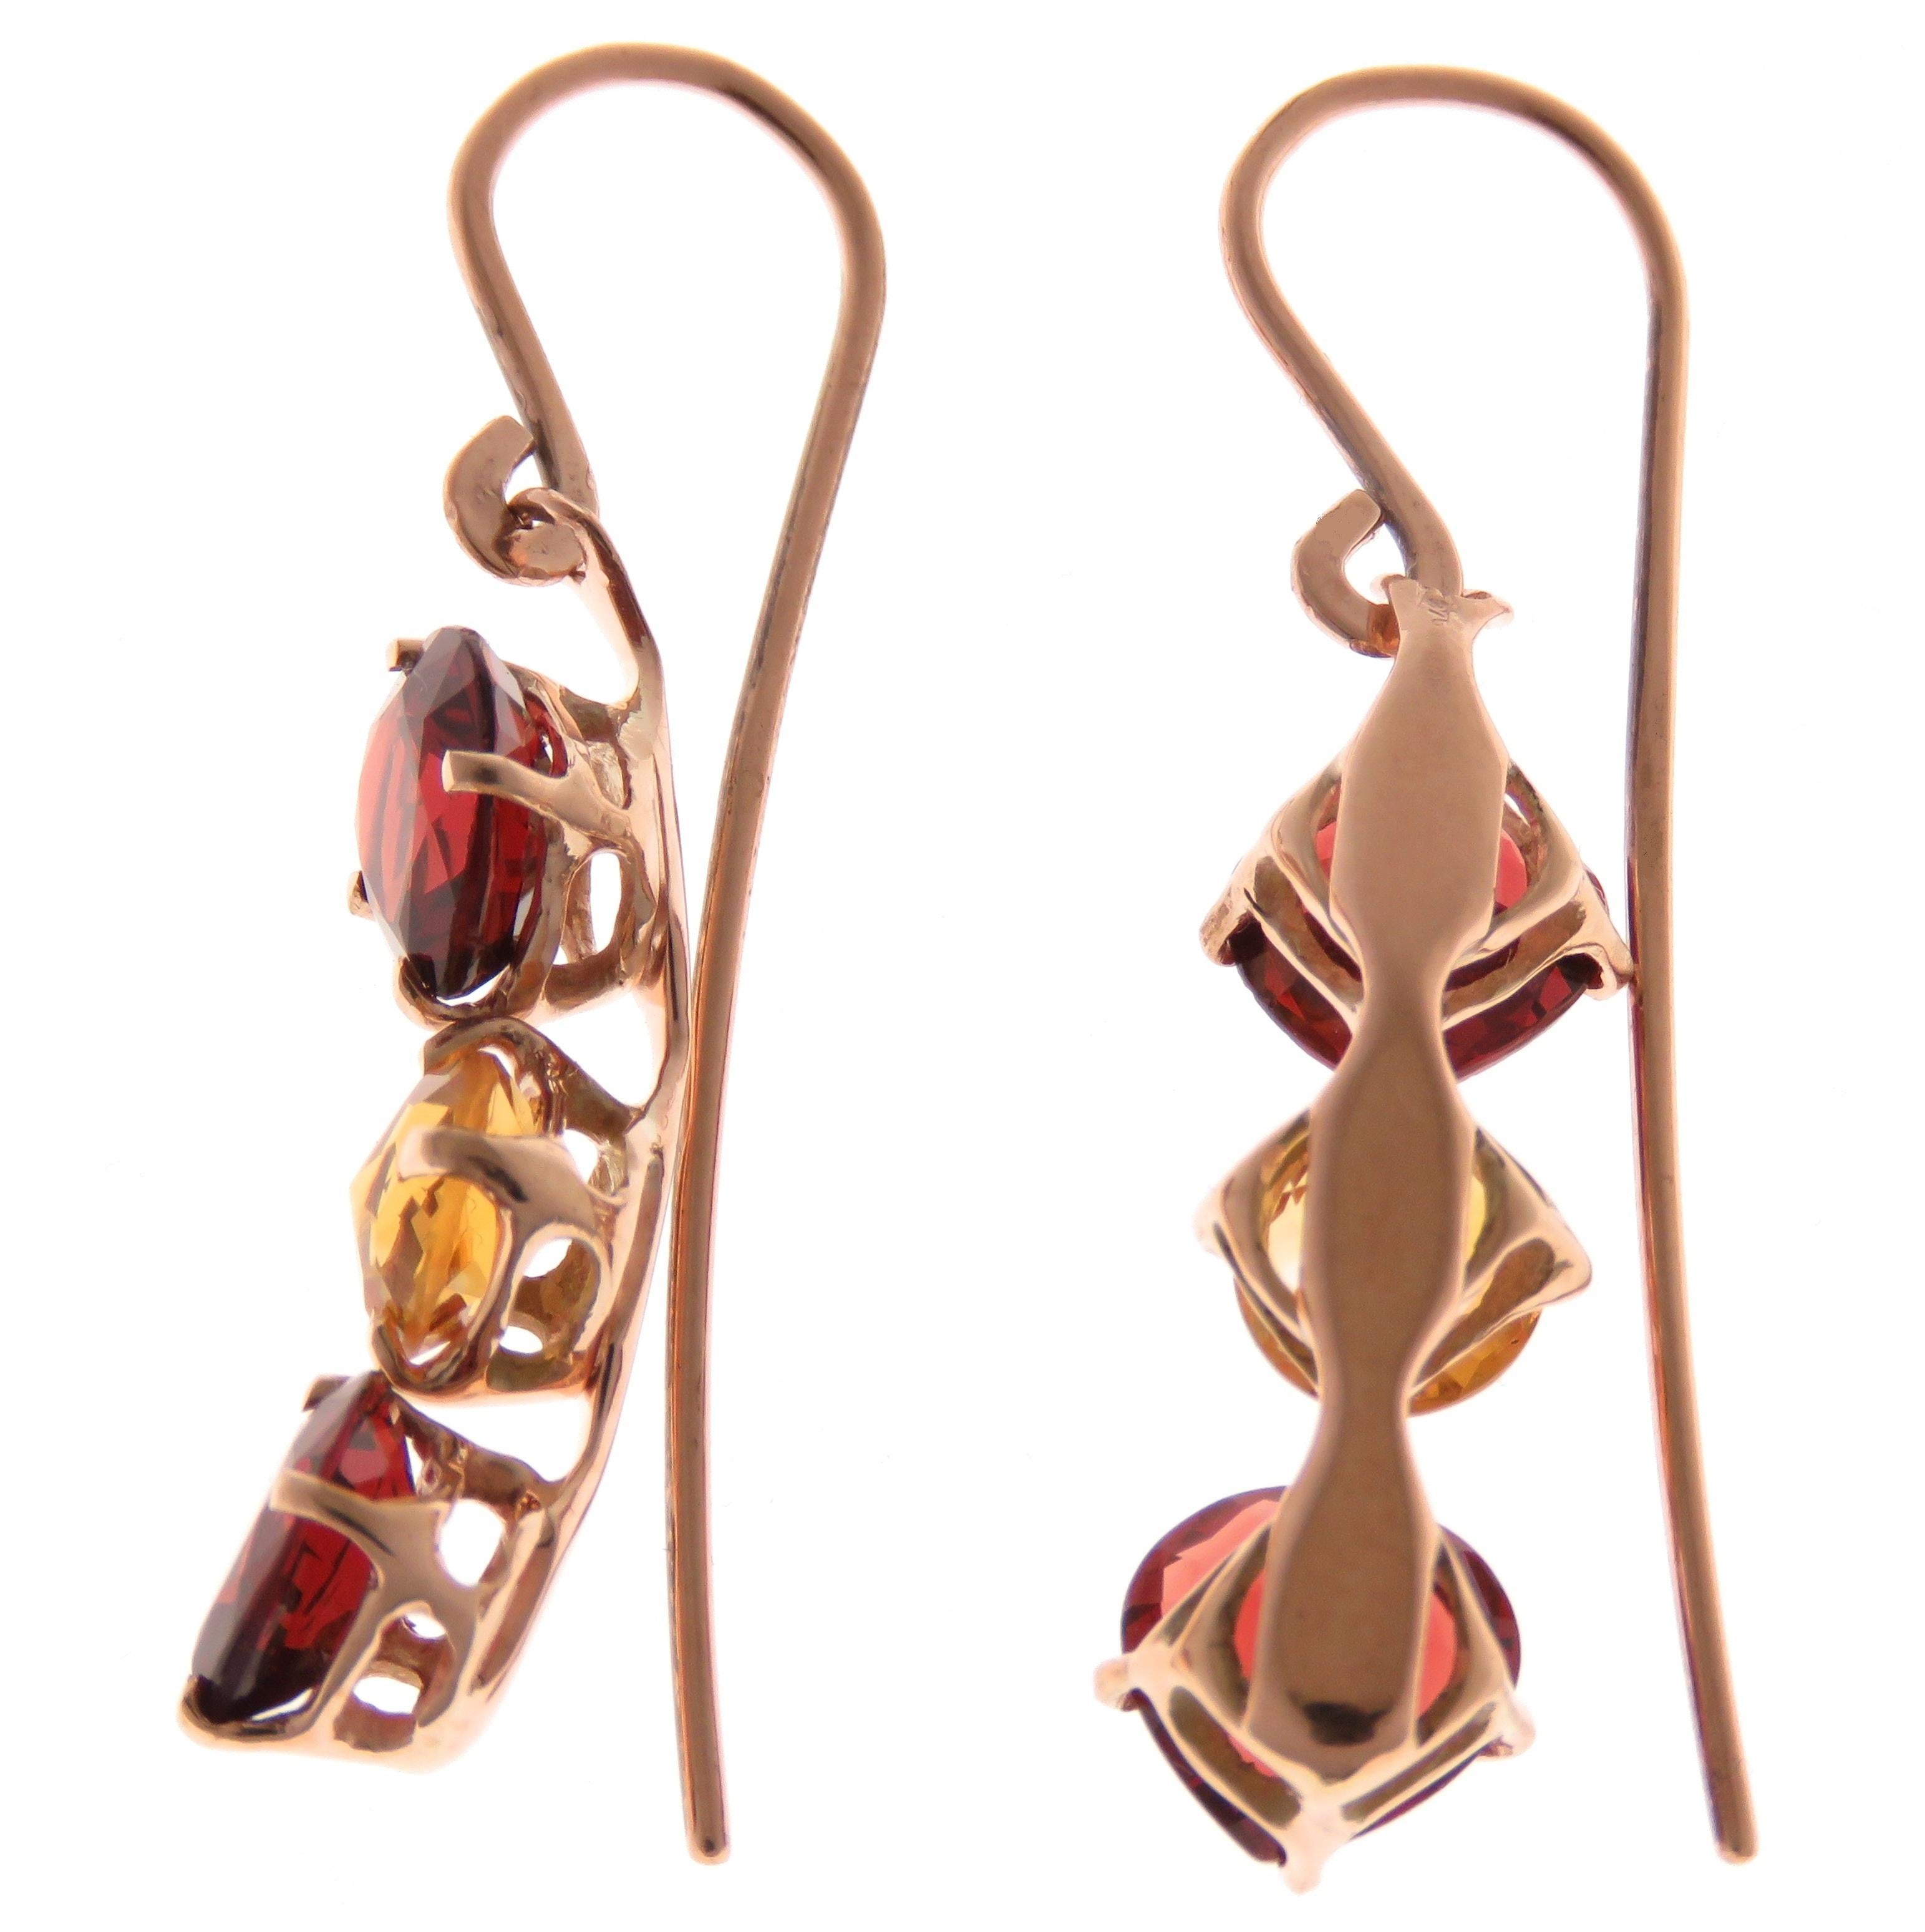 Elegant earrings in 9 karat rose gold handcrafted in Italy by Botta Gioielli with 4 natural heart cut garnets and 2 natural rose cut citrines. Each earring is marked with the Italian Gold Mark 375 and Botta Gioielli Brandmark 716MI.

4 natural